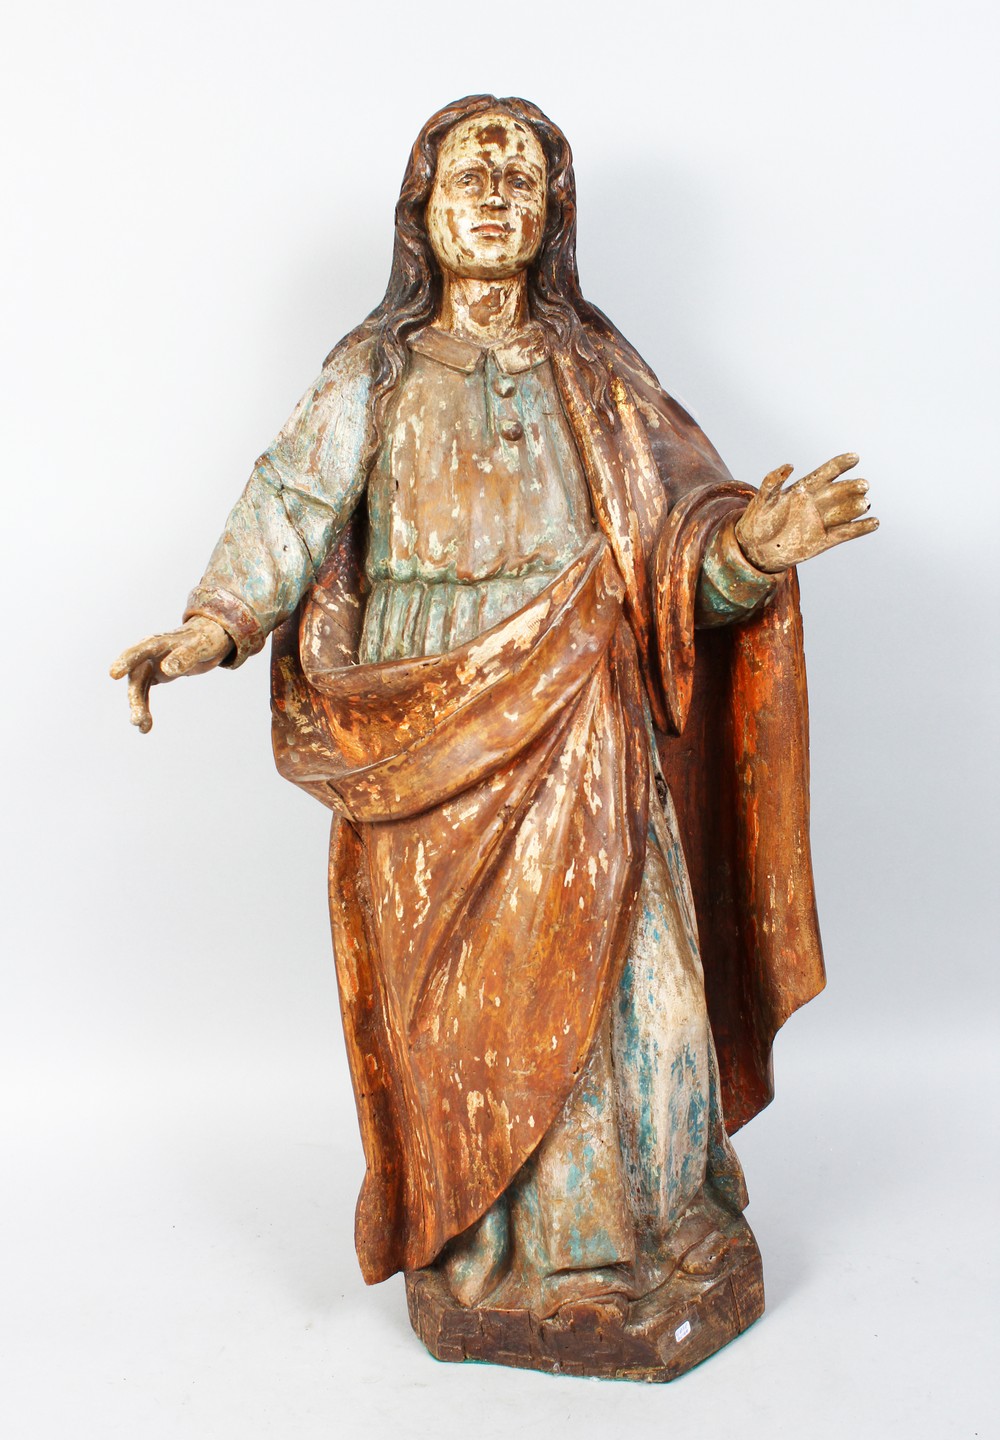 A 17TH-18TH CENTURY ITALIAN CARVED WOOD AND PAINTED FIGURES, arms outstretched. 28ins high.